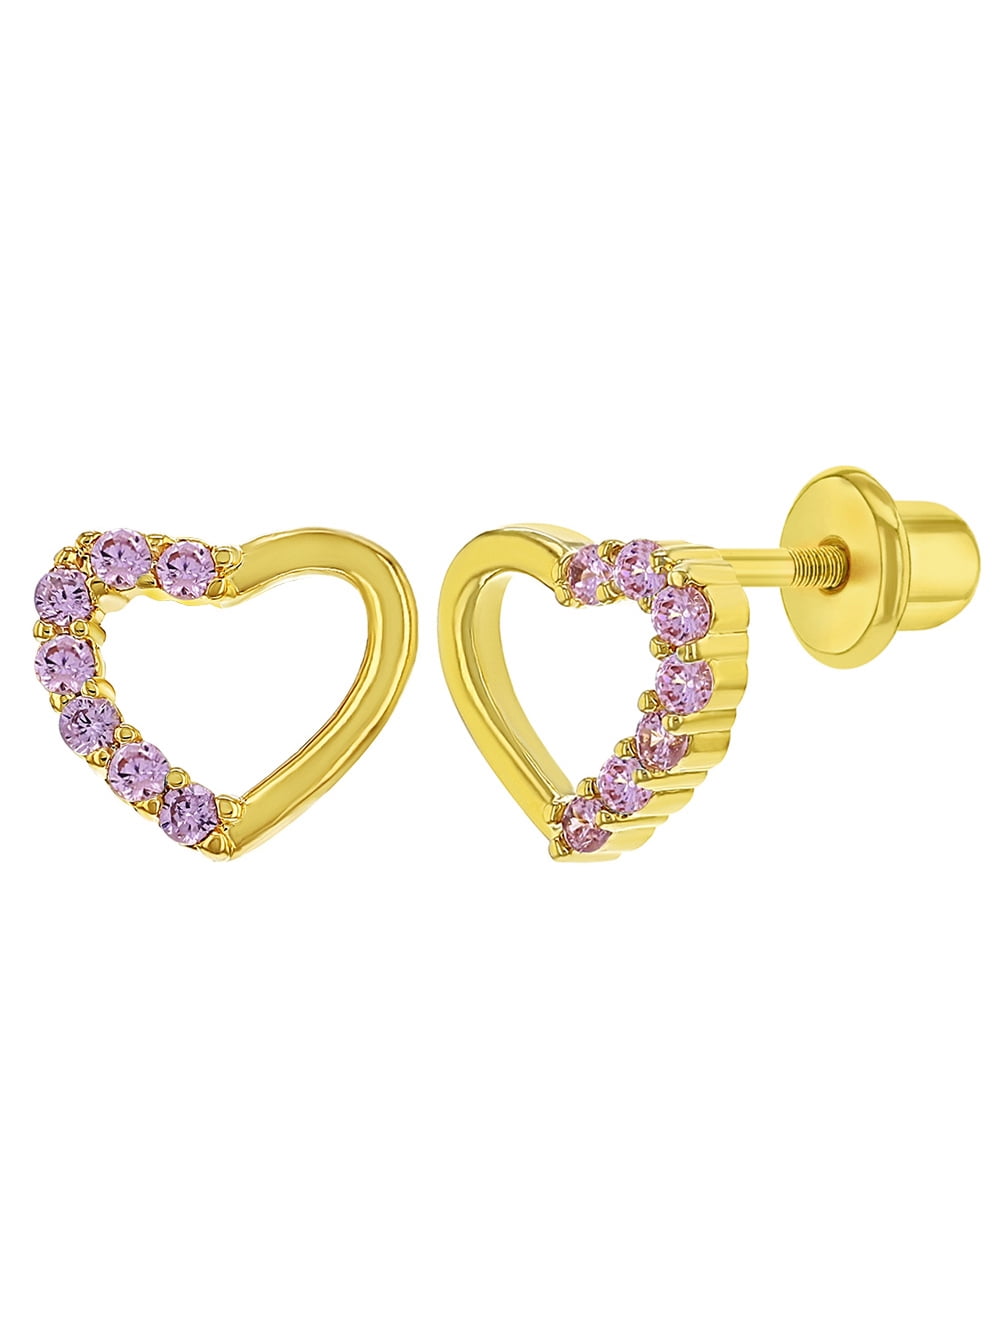 Child Baby Girls Security Crystal Heart Hoop earrings Jewelry 14k Gold plated 